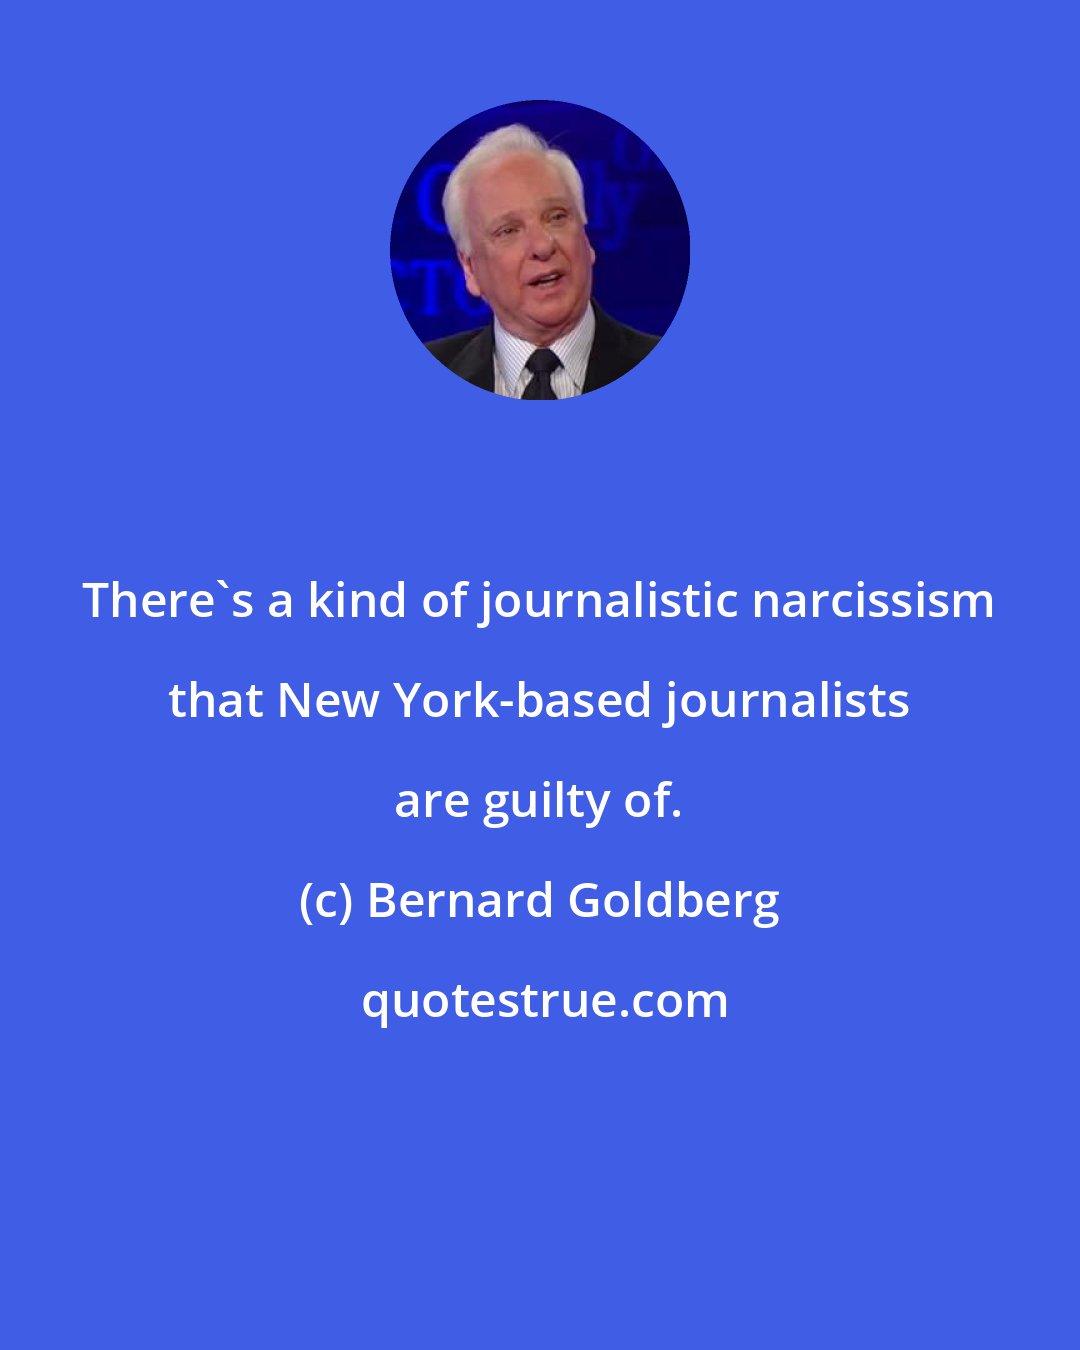 Bernard Goldberg: There's a kind of journalistic narcissism that New York-based journalists are guilty of.